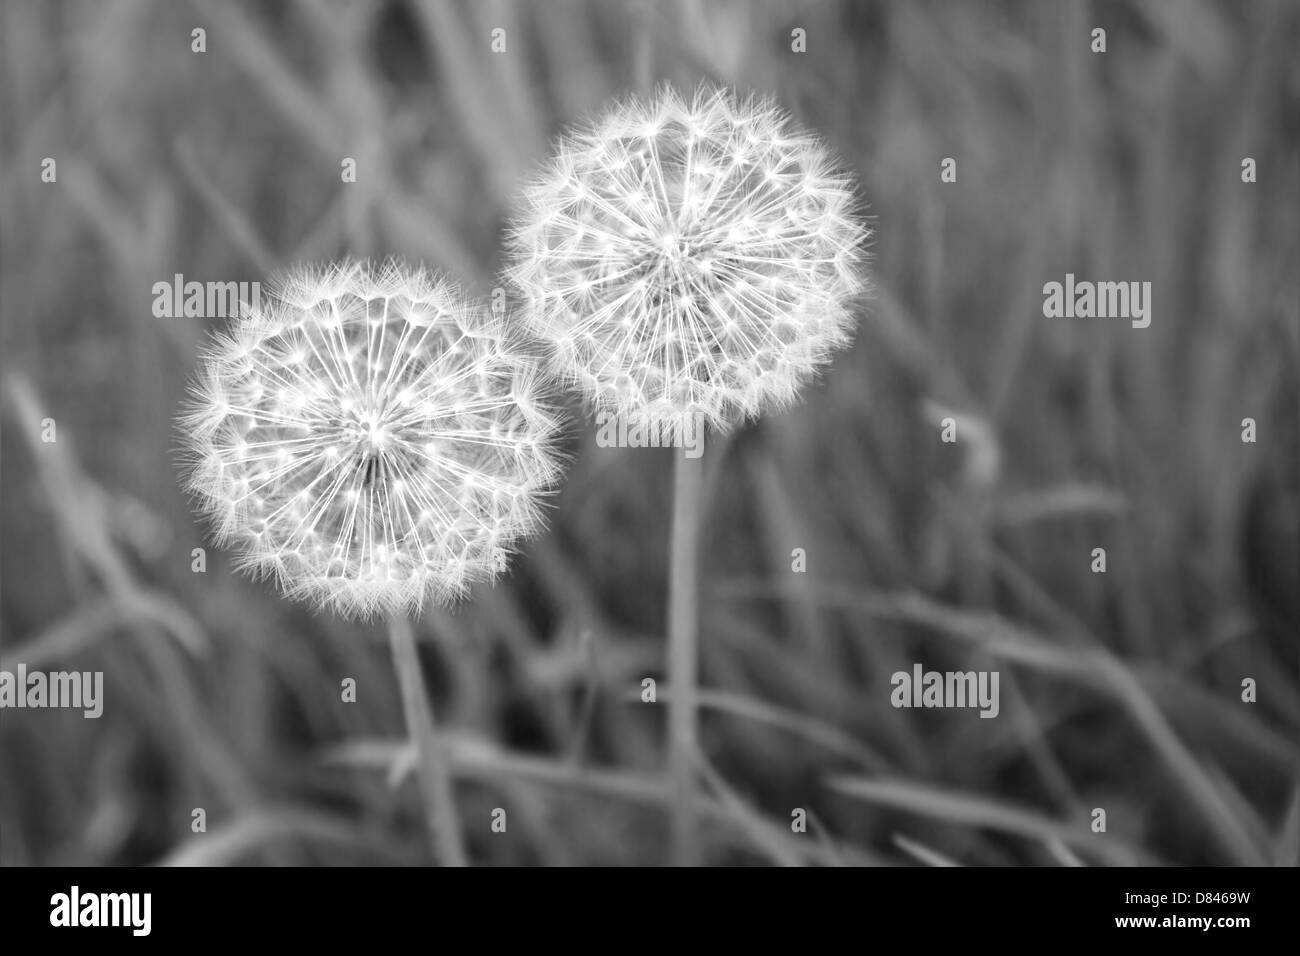 Dandelion seed heads close up Stock Photo